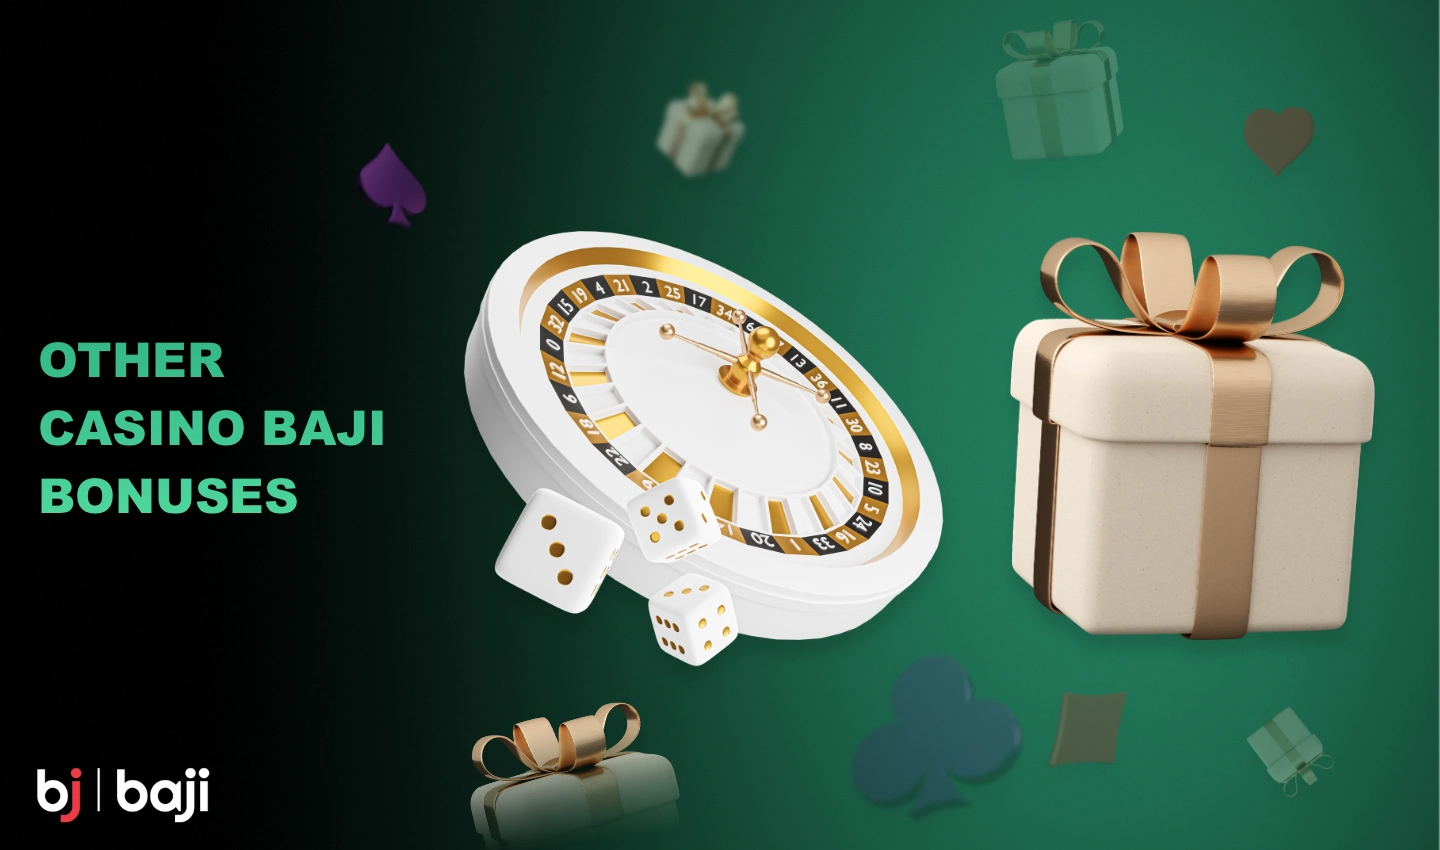 There are various casino bonuses available at Baji